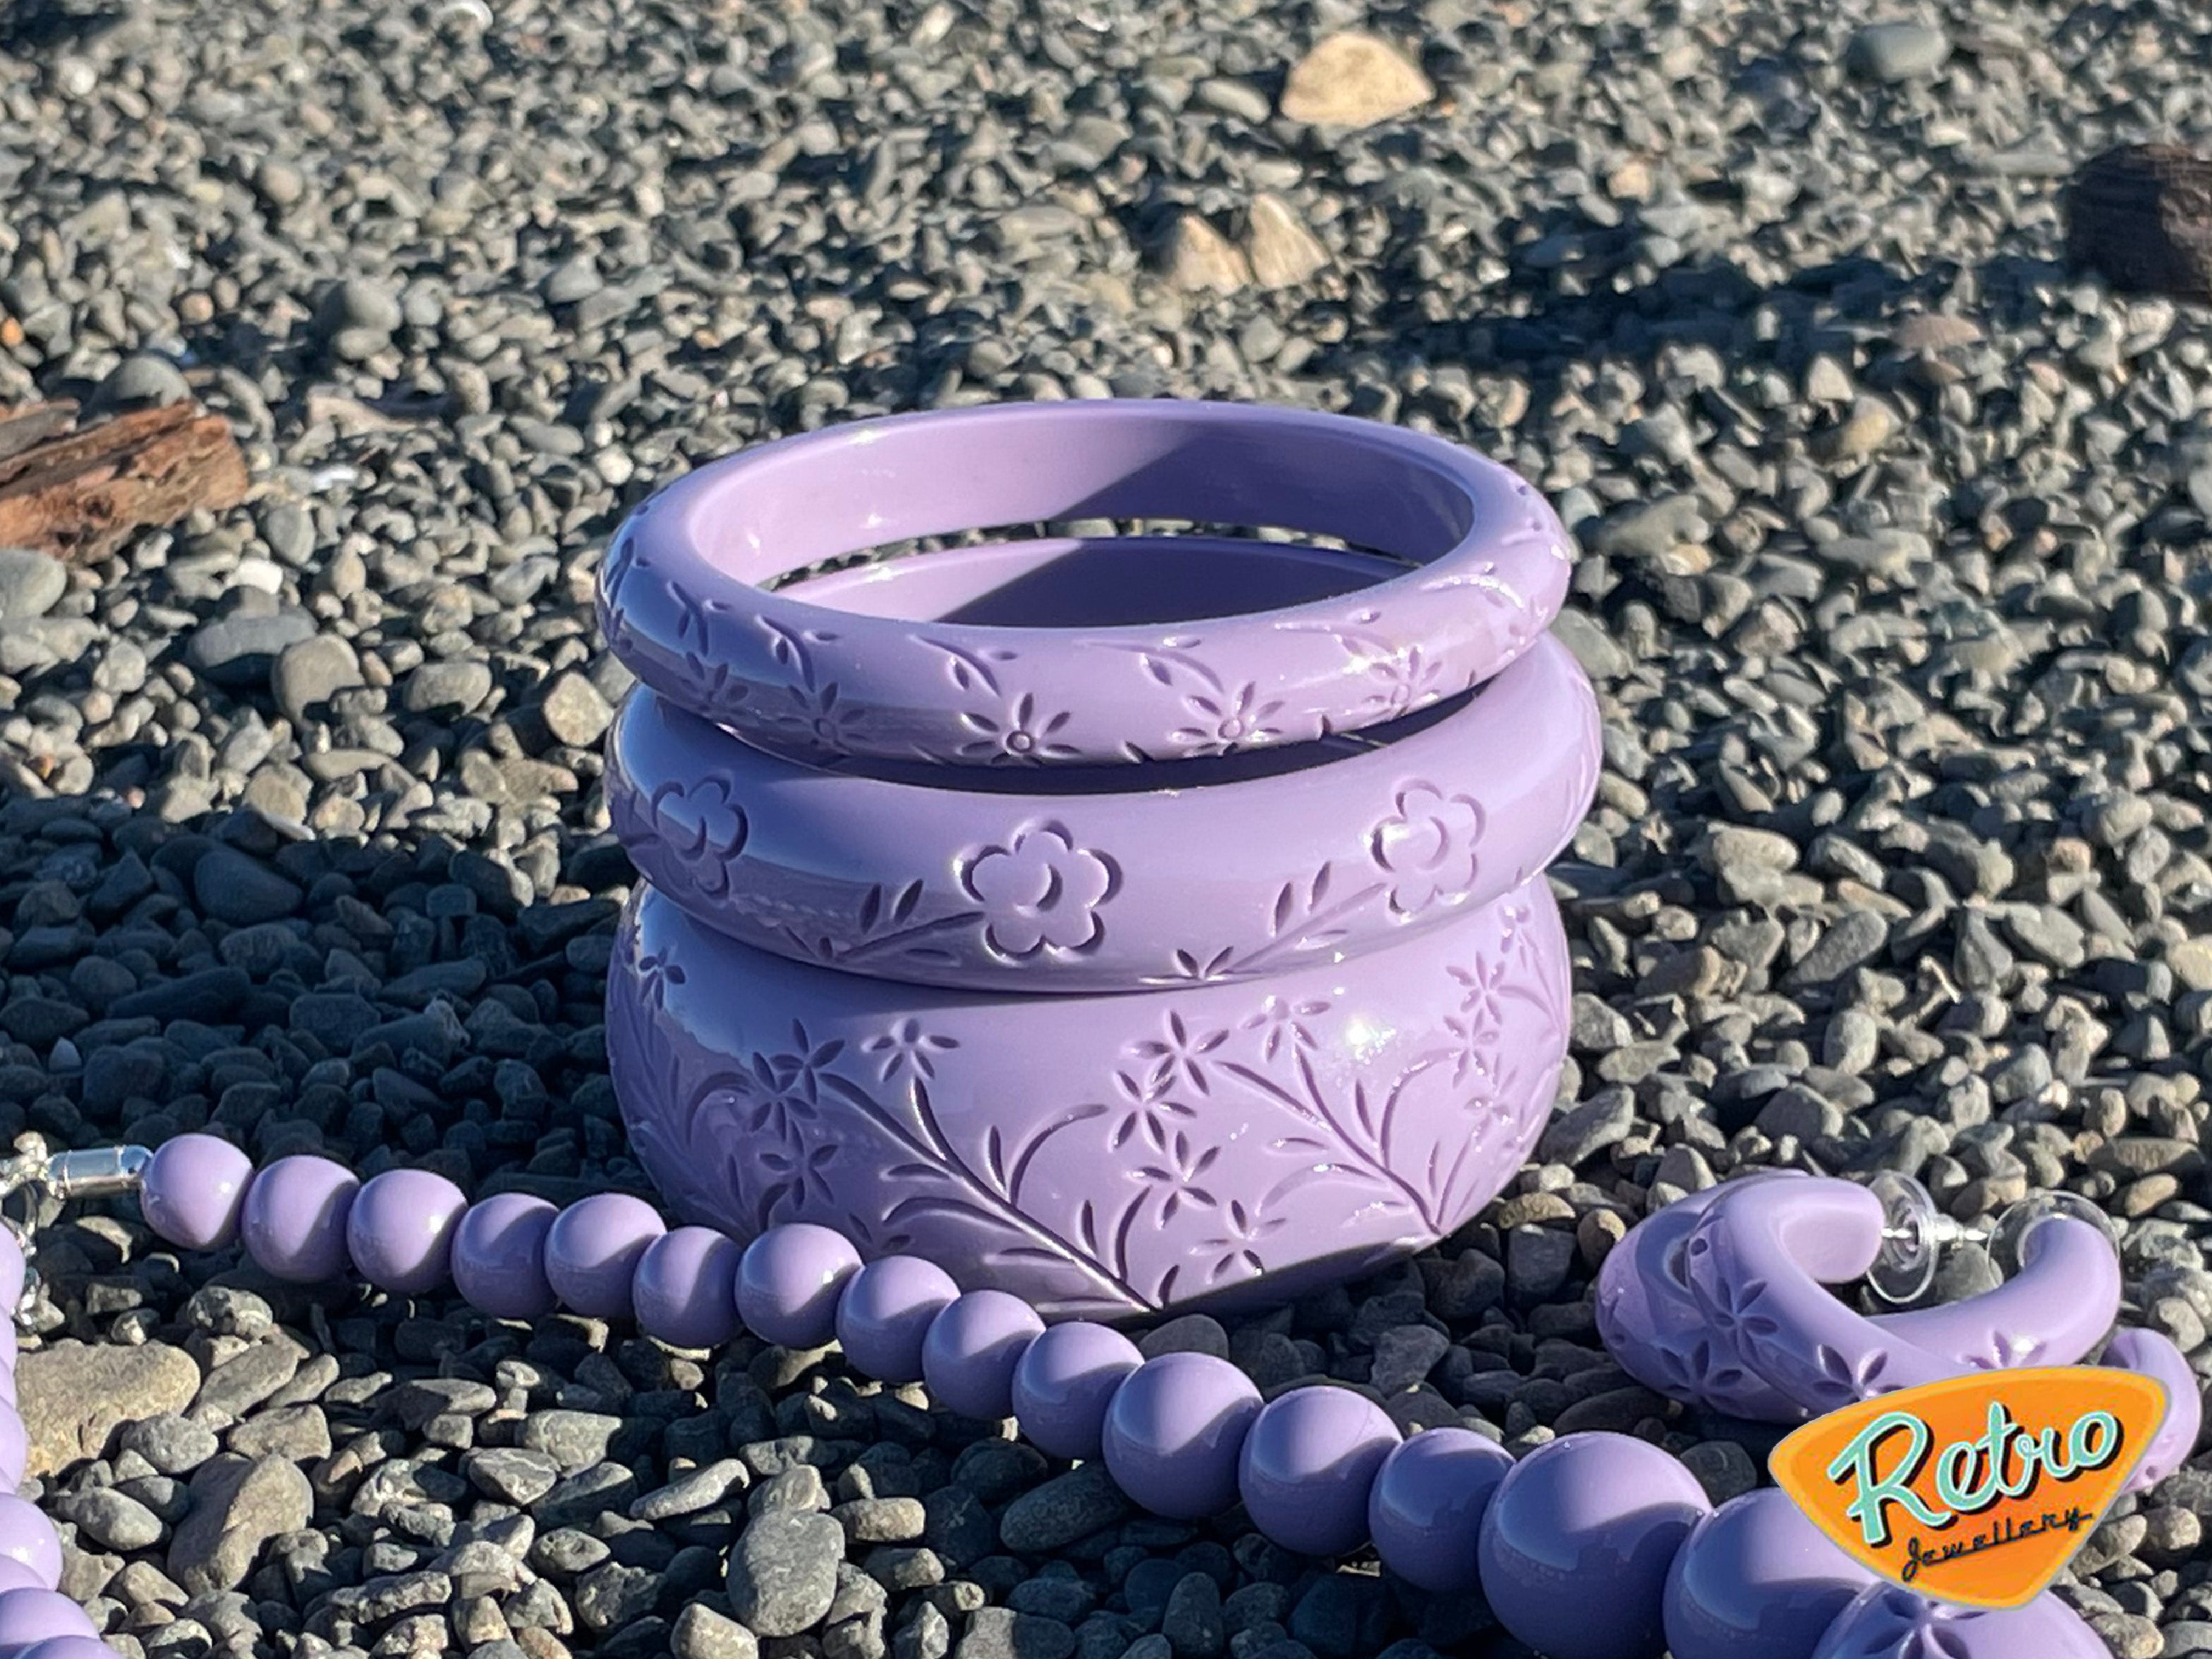 Wide "Blossom" in lilac by MCR carved fakelite bangle